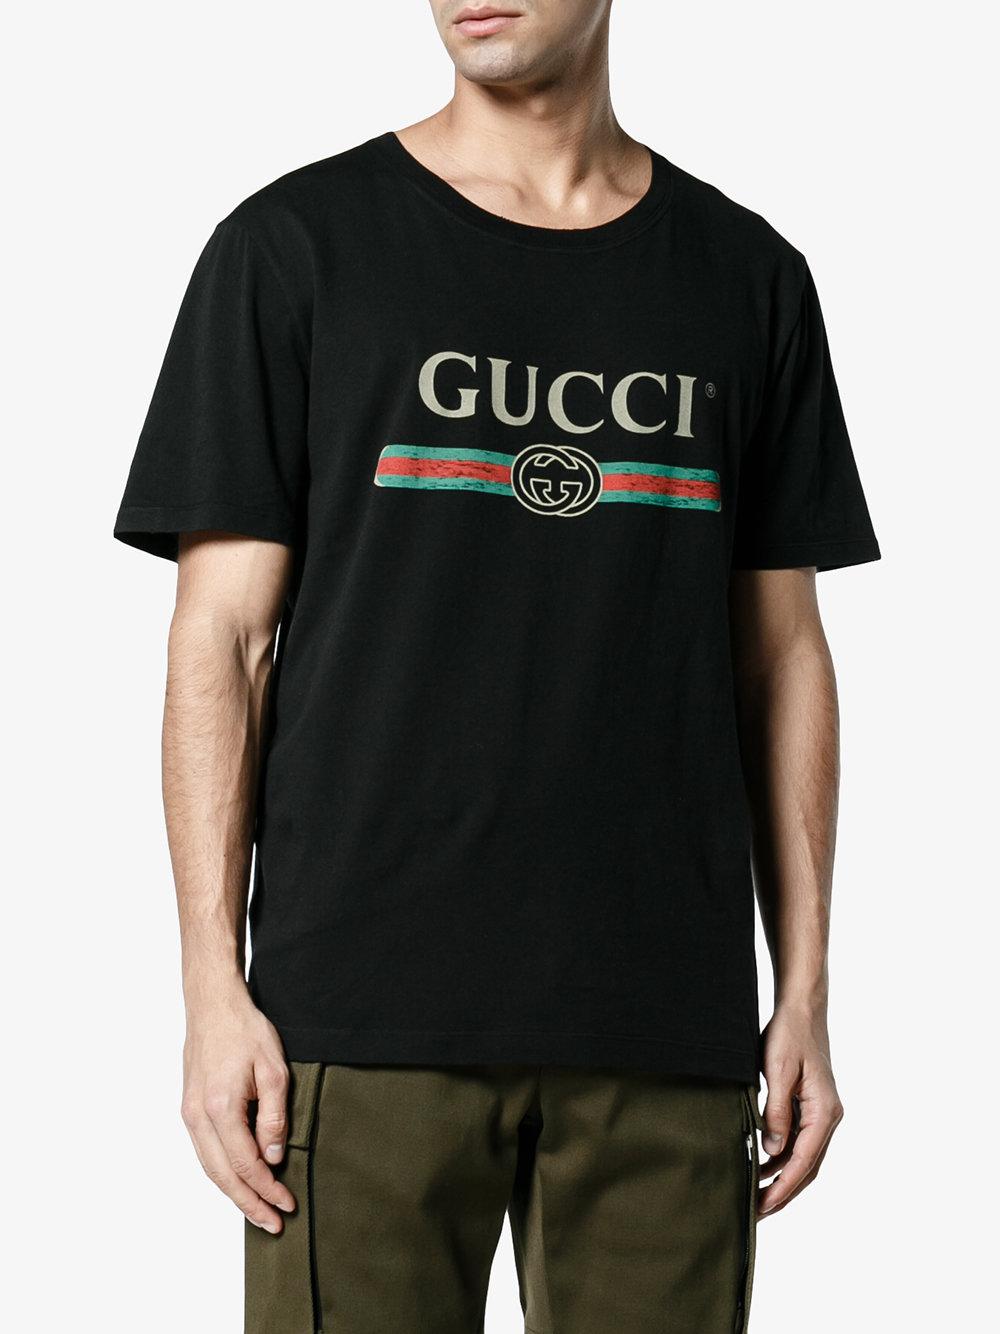 Gucci Cotton Washed T Shirt With Logo in Black for Men - Lyst